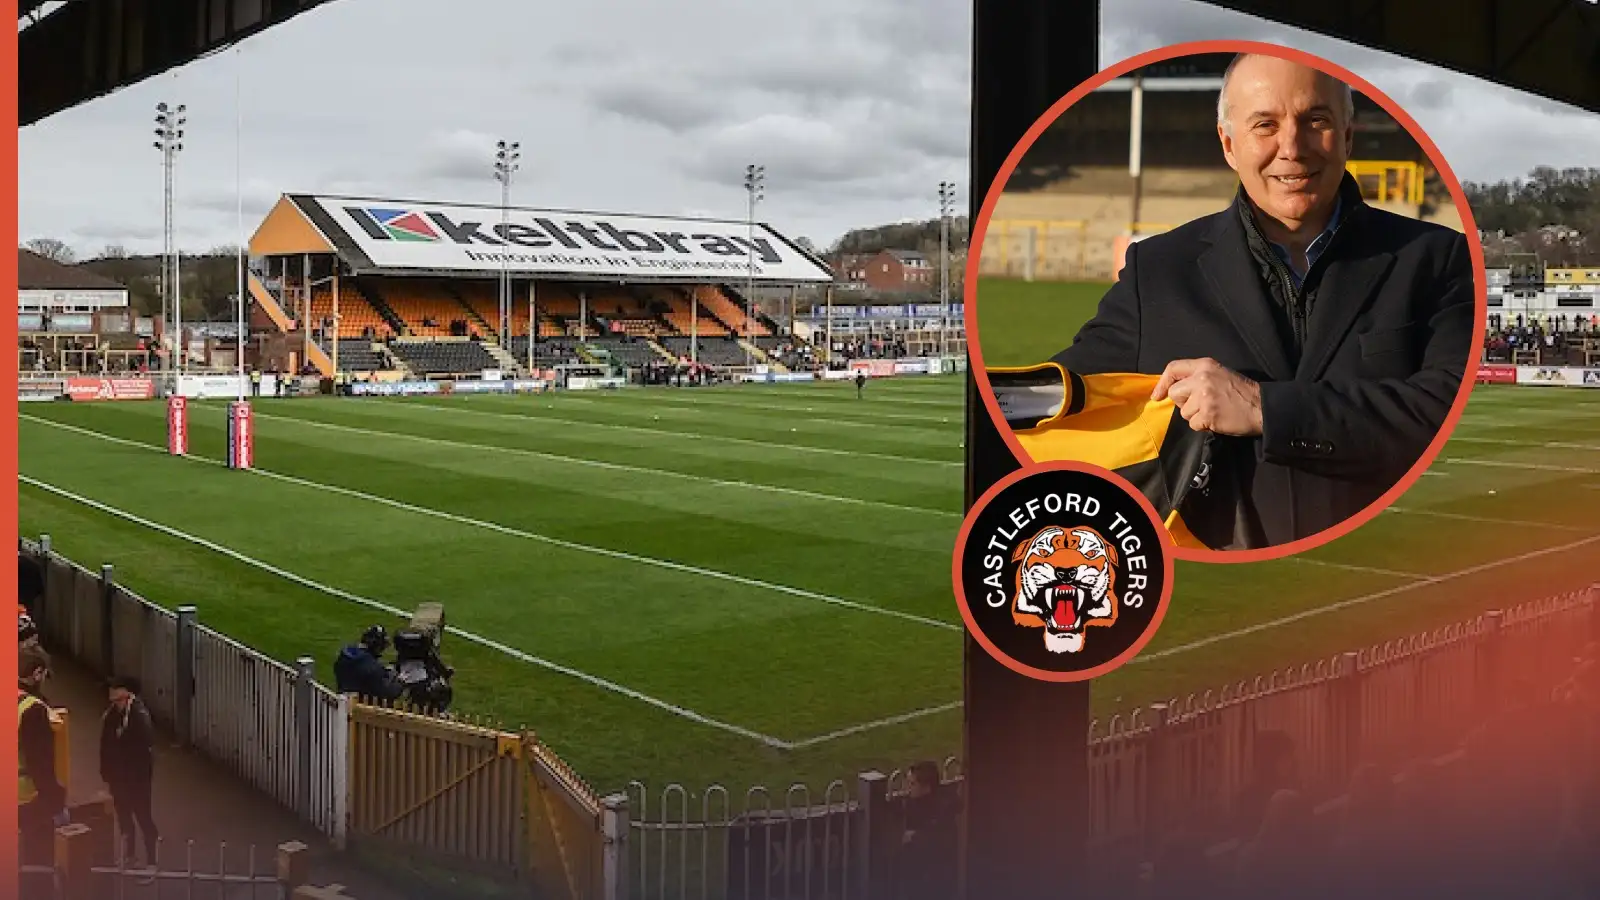 Castleford Tigers investor Martin Jepson predicts IMG score and explains Wheldon Road redevelopment